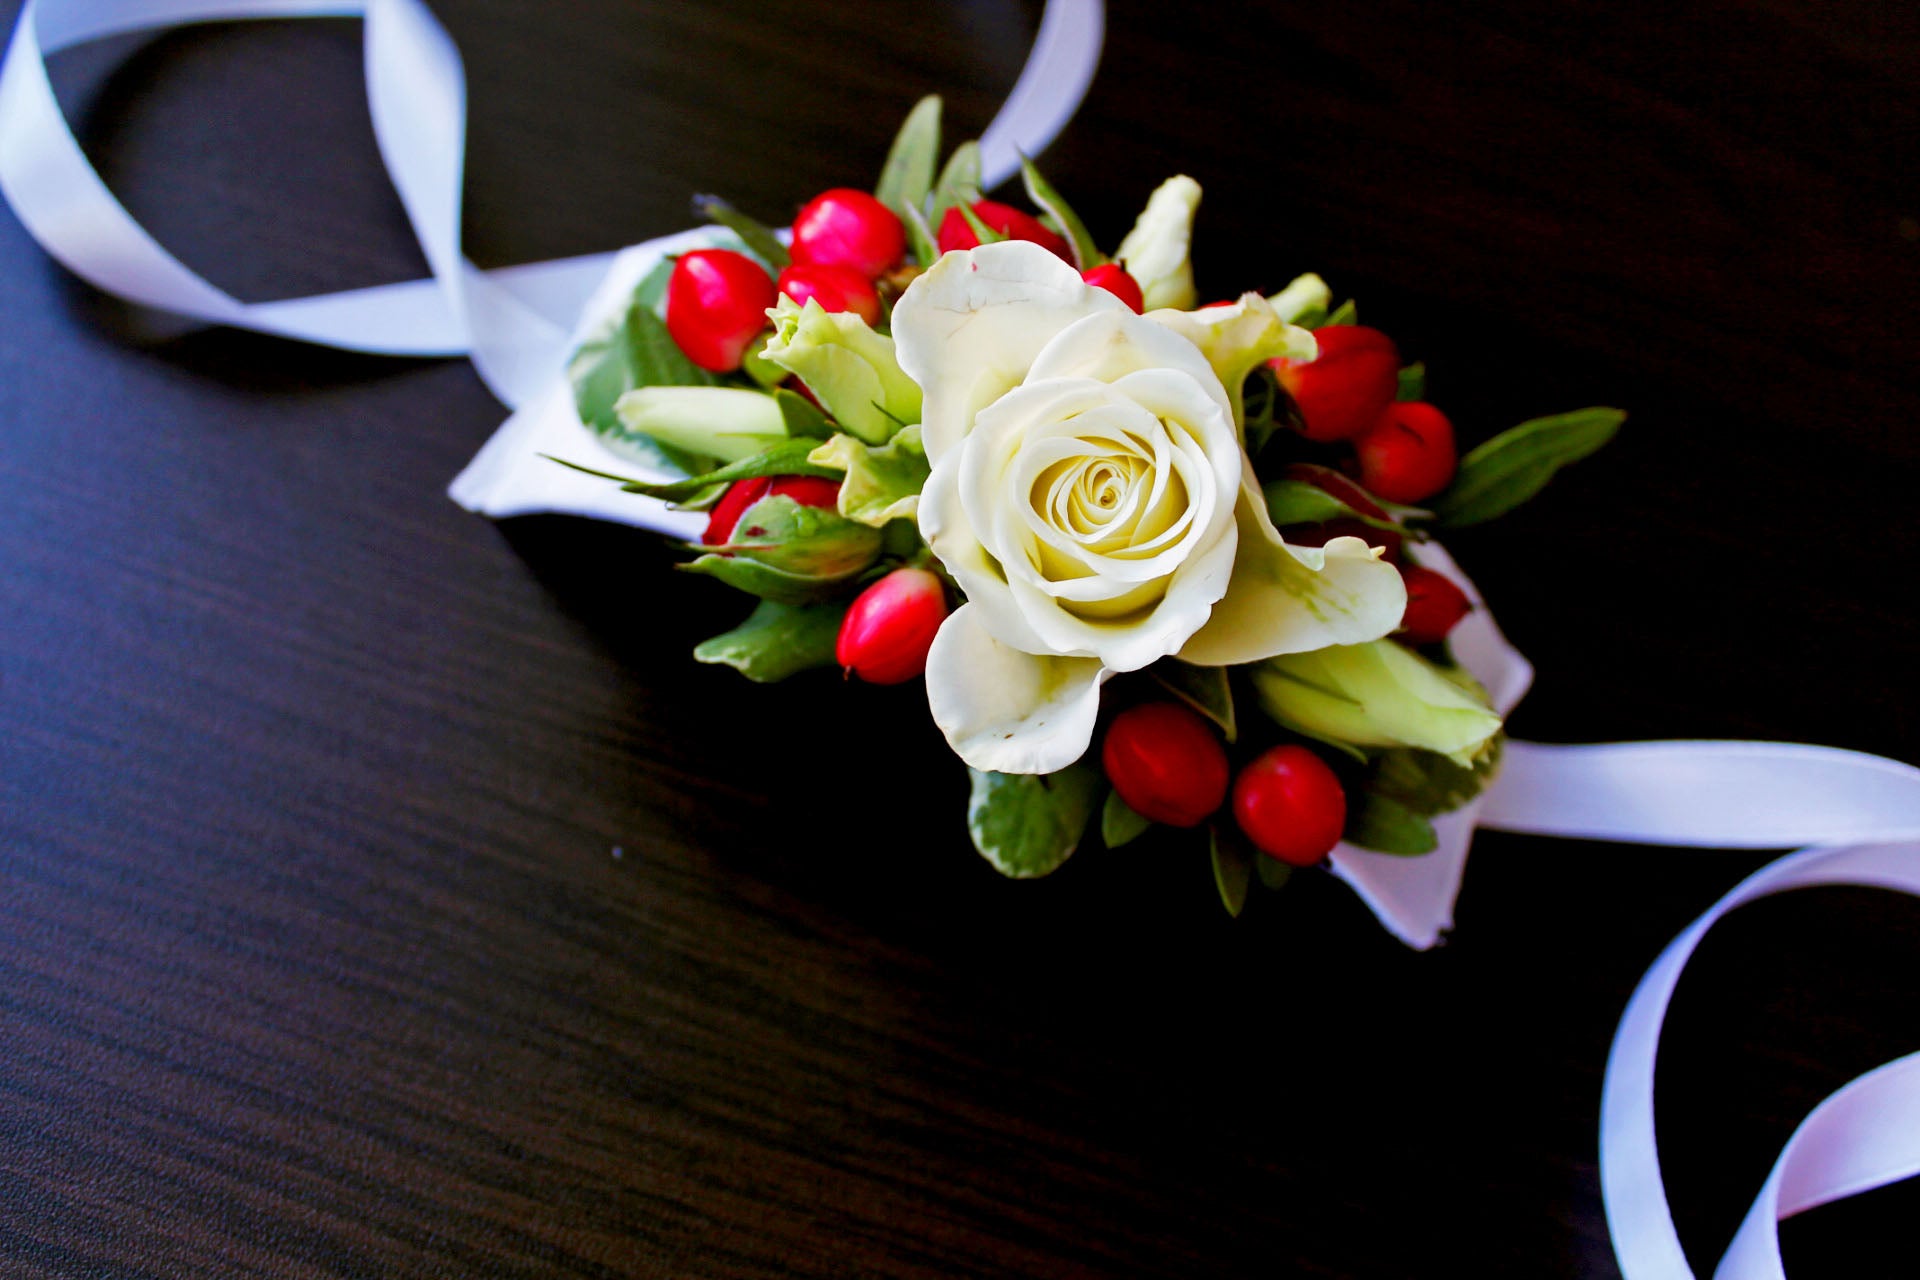 When elegance is of the utmost importance, choose classic cream-colored roses and red berries.    Cream-colored roses and red hypericum.